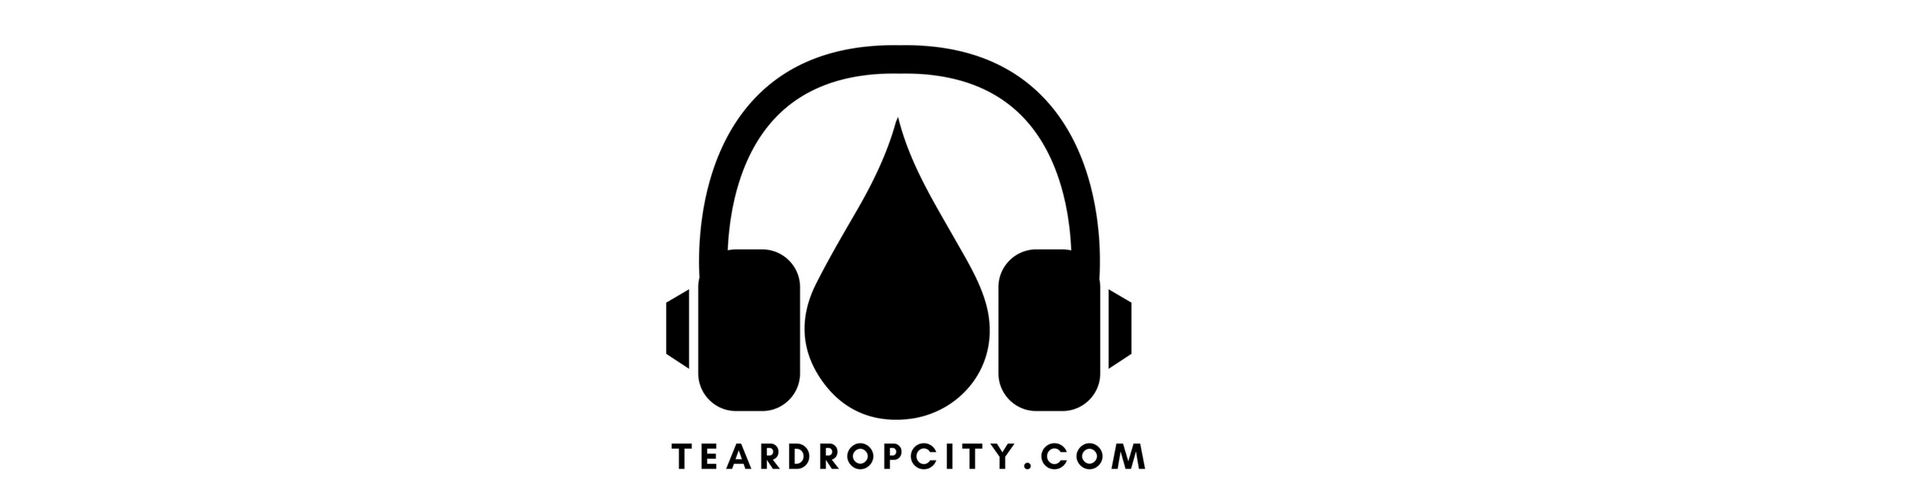 TEARDROPCITY.COM - music for late nights & early mornings-contemporary ...